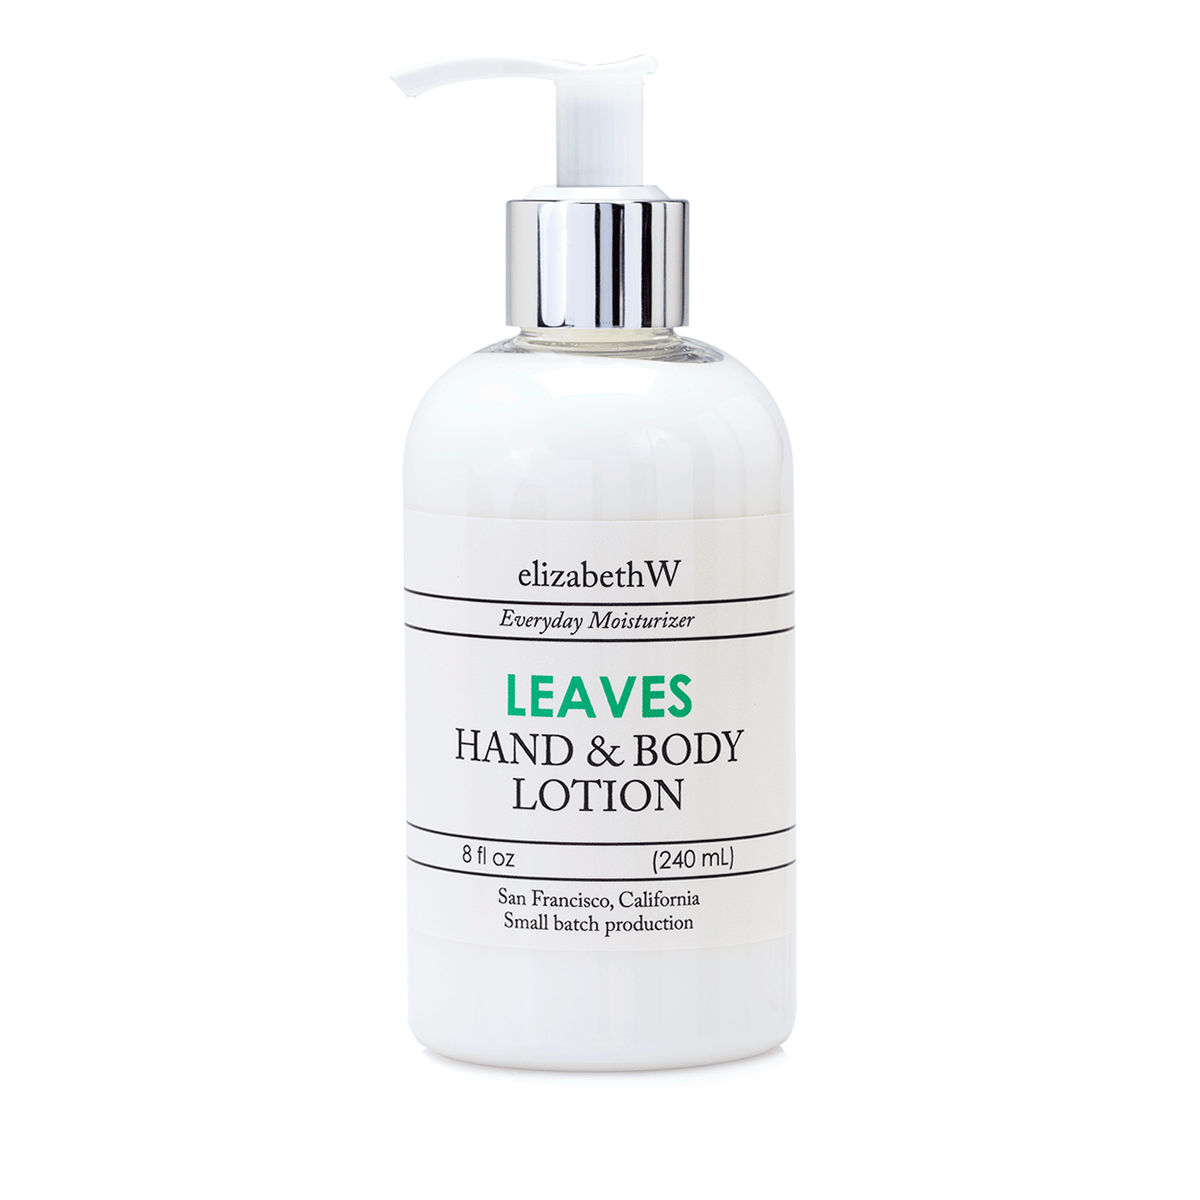 A bottle of elizabeth W Small Batch Apothecary Leaves hand and body lotion with a pump dispenser, labeled "Atlas Cedar & Body Lotion." It contains 8 fl oz (240 ml) and is produced by elizabeth W.